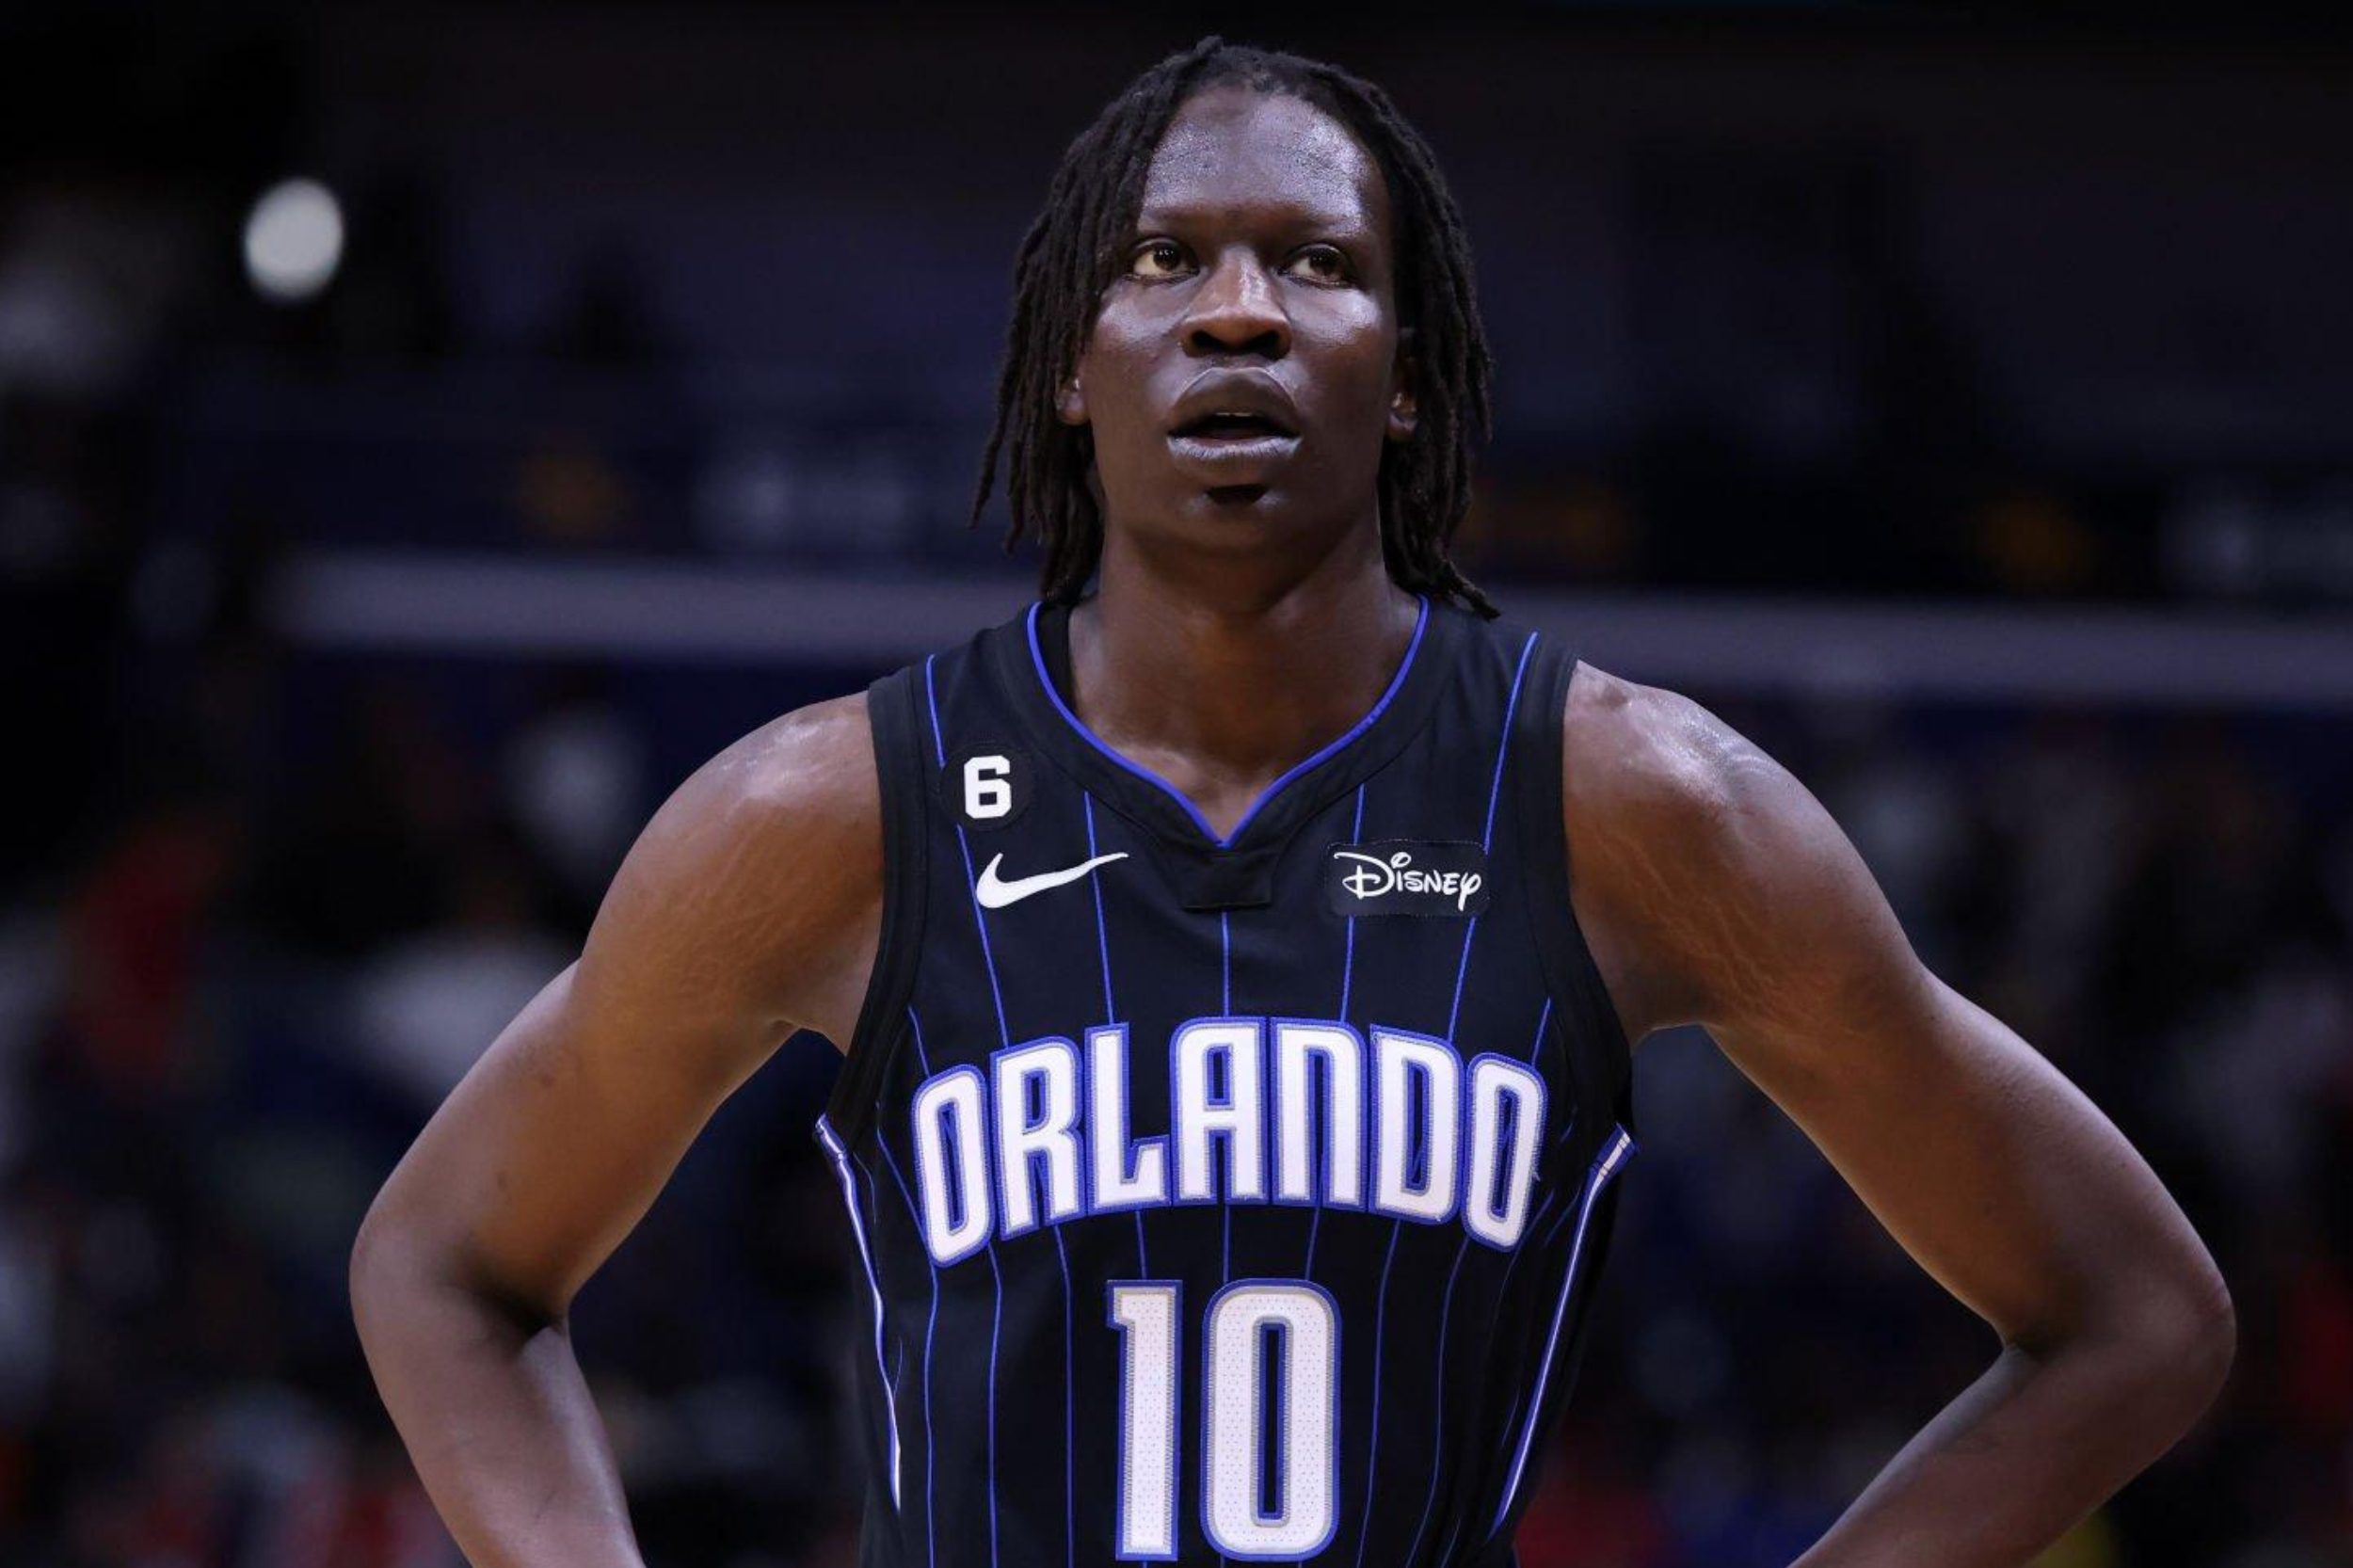 NEW ORLEANS, LOUISIANA - FEBRUARY 27: Bol Bol #10 of the Orlando Magic reacts against the New Orleans Pelicans during a game at the Smoothie King Center on February 27, 2023 in New Orleans, Louisiana. NOTE TO USER: User expressly acknowledges and agrees that, by downloading and or using this Photograph, user is consenting to the terms and conditions of the Getty Images License Agreement. (Photo by Jonathan Bachman/Getty Images)